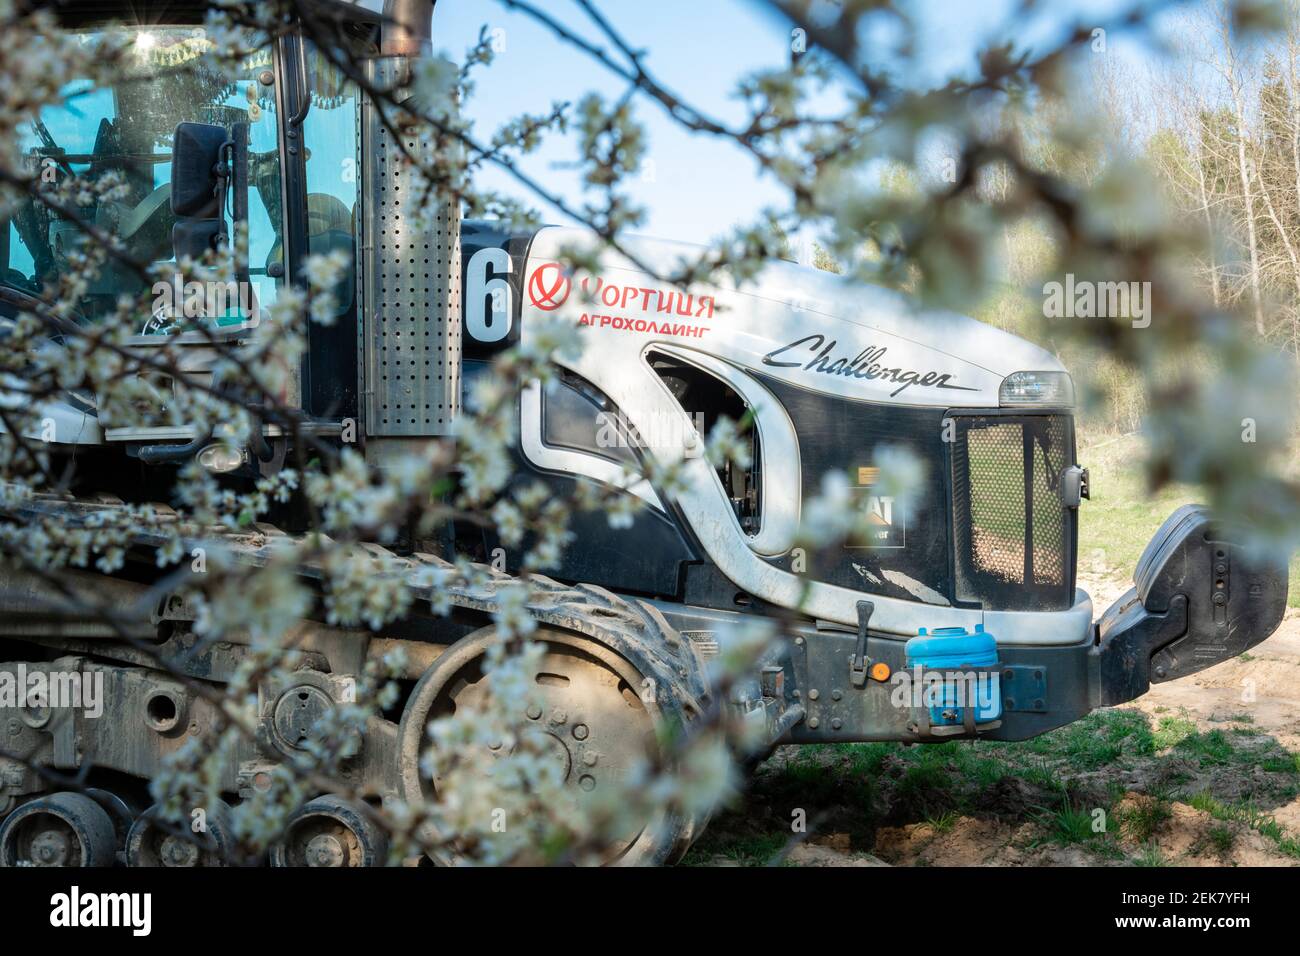 Dolyna, Ukraine April 29, 2020: agro-industrial machinery will cultivate the fields, a tractor of a challender company on caterpillars, an agricultura Stock Photo